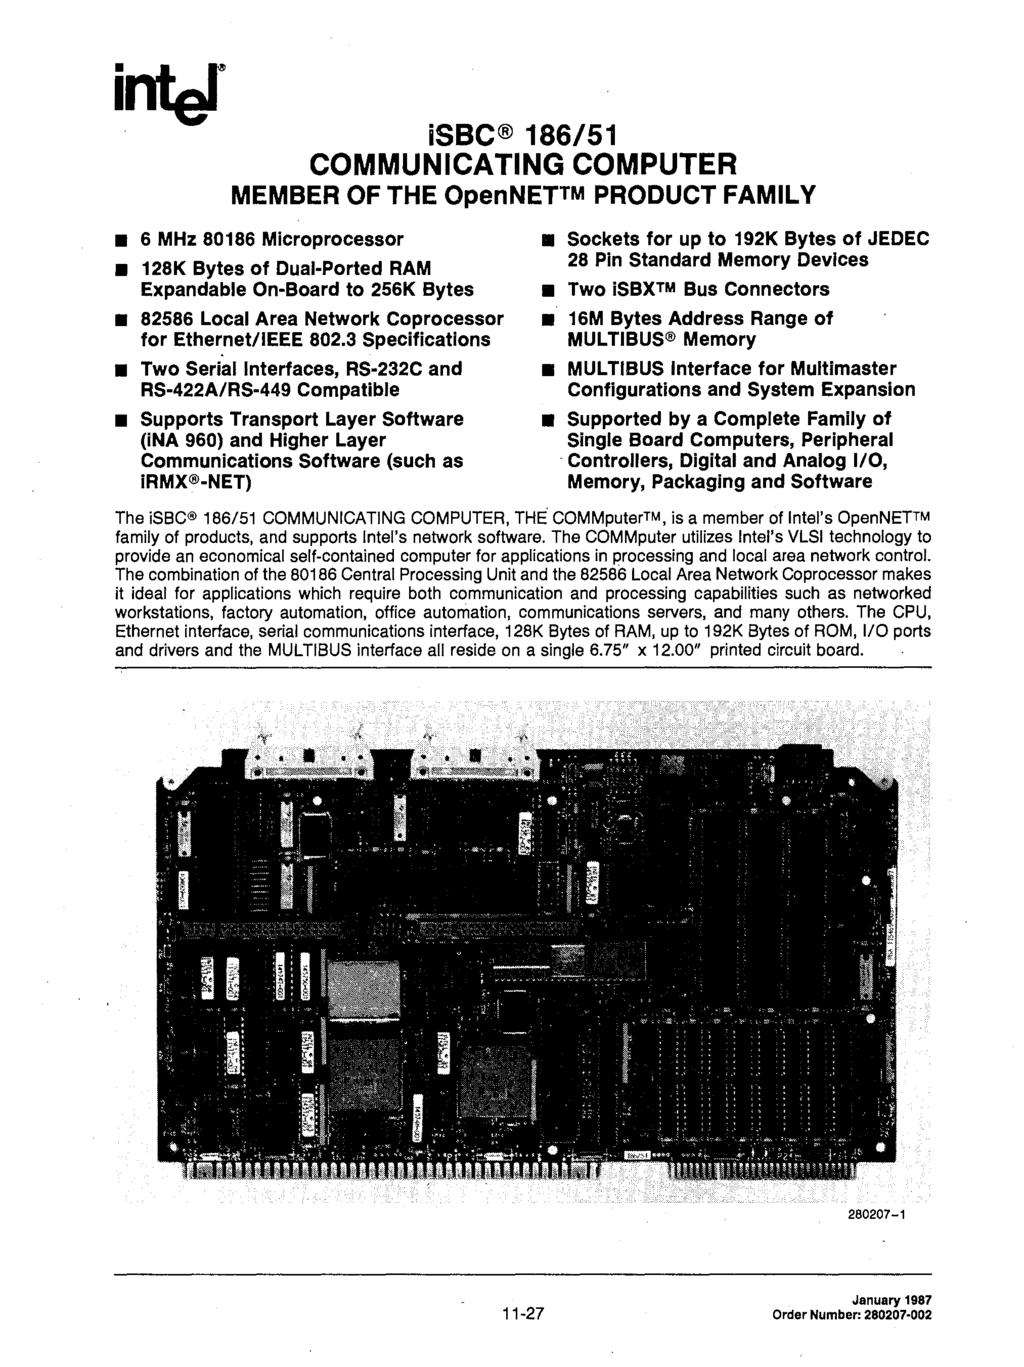 isbc 186/51 COMMUNCATNG COMPUTER MEMBER OF THE OpenNETTM PRODUCT FAMLY 6 MHz 80186 Microprocessor Sockets for up to 192K Bytes of JEDEC 128K Bytes of Dual-Ported RAM 28 Pin Standard Memory Devices